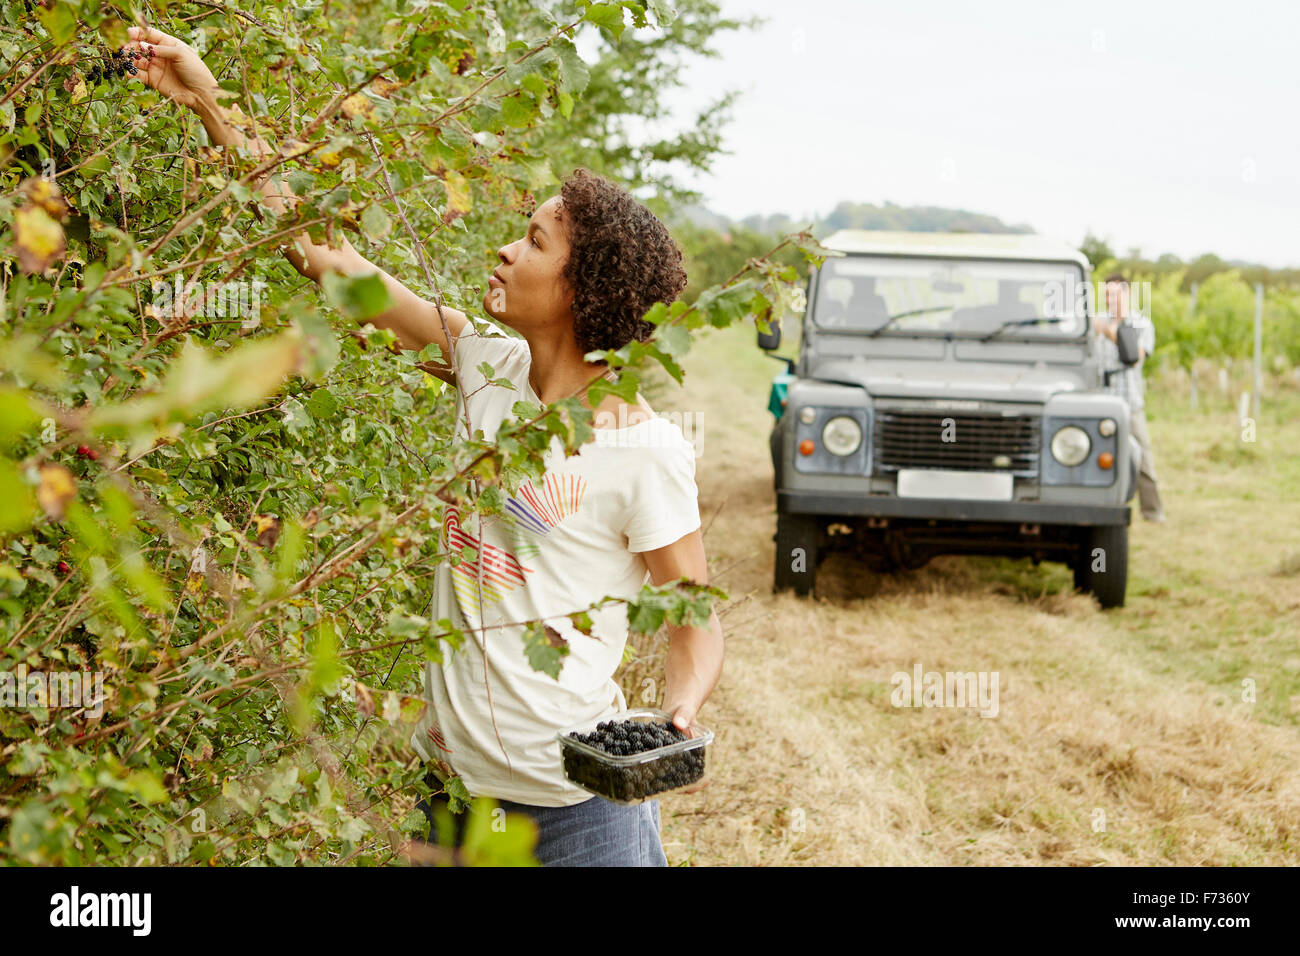 A woman picking blackberries from the hedgerow in autumn. Stock Photo